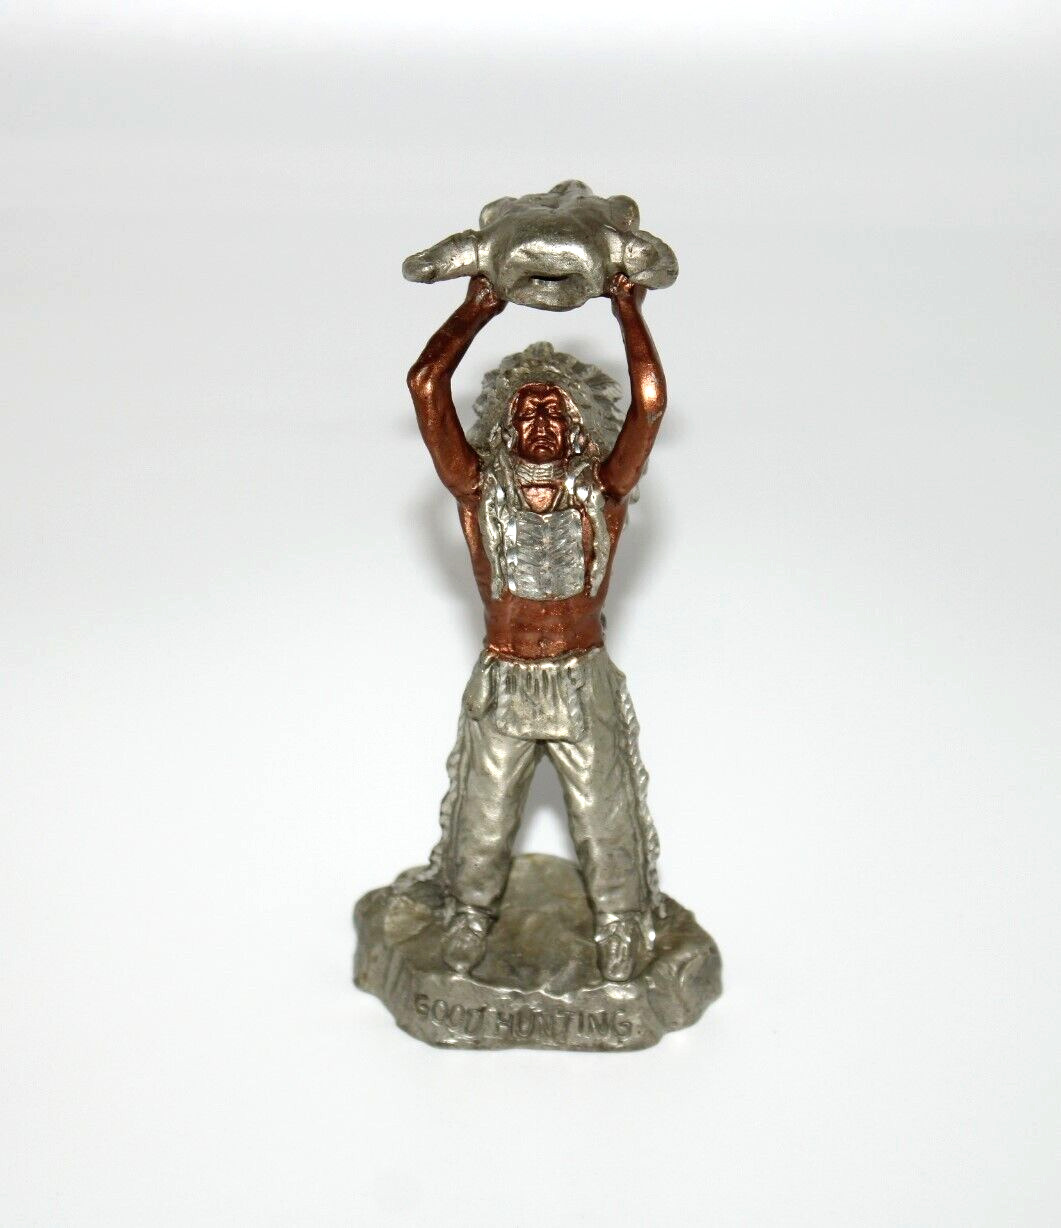 Peter Sedlow Native American Indian Chief Pewter Figurine GOOD HUNTING